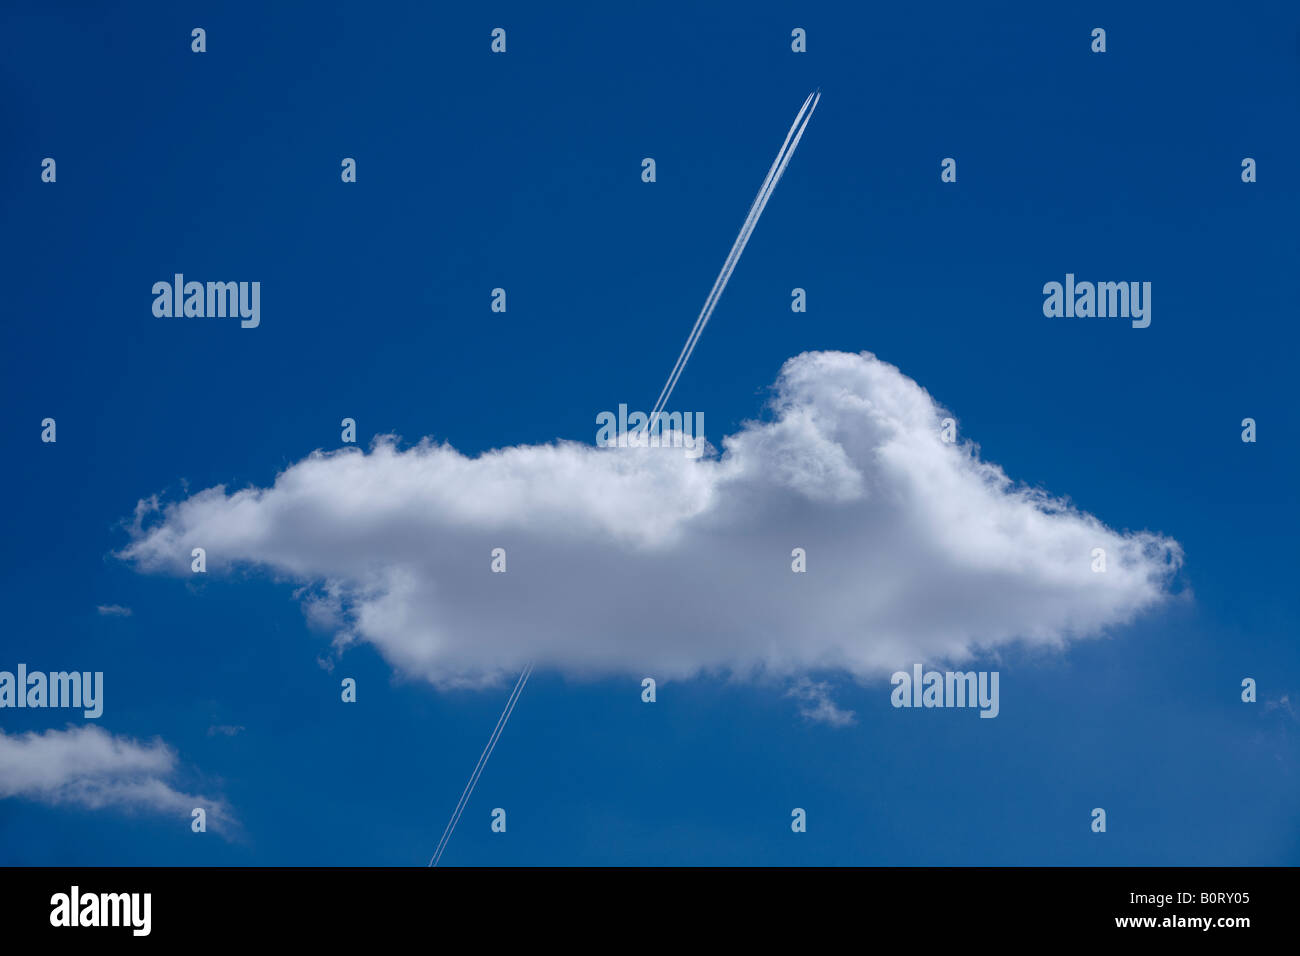 trace of the aircraft in the blue skies through a cloud Stock Photo